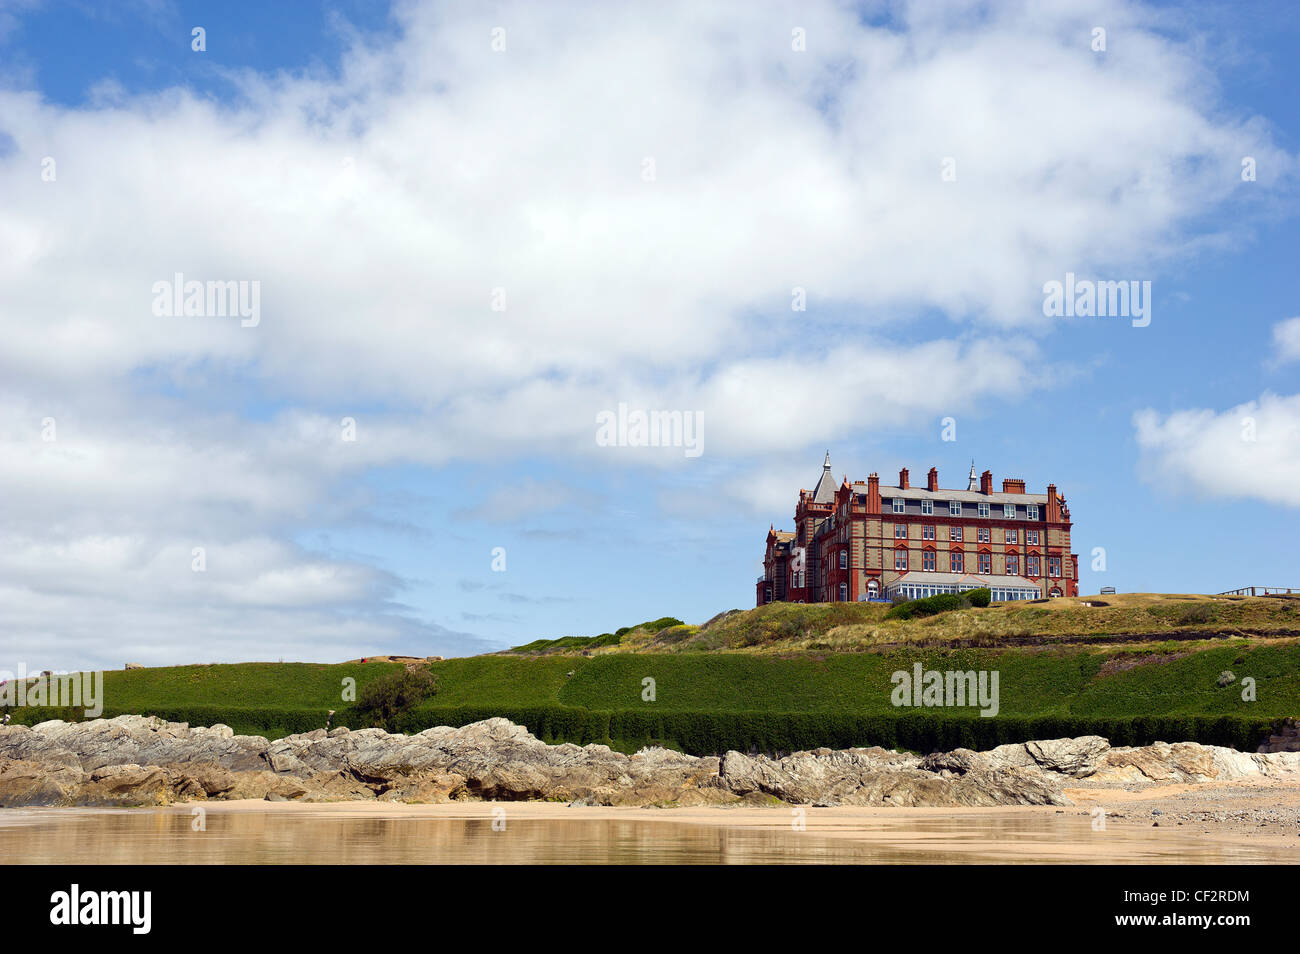 The Headland Hotel, a Grade II listed building on a designated Site of Special Scientific Interest on the Cornish coast. Stock Photo